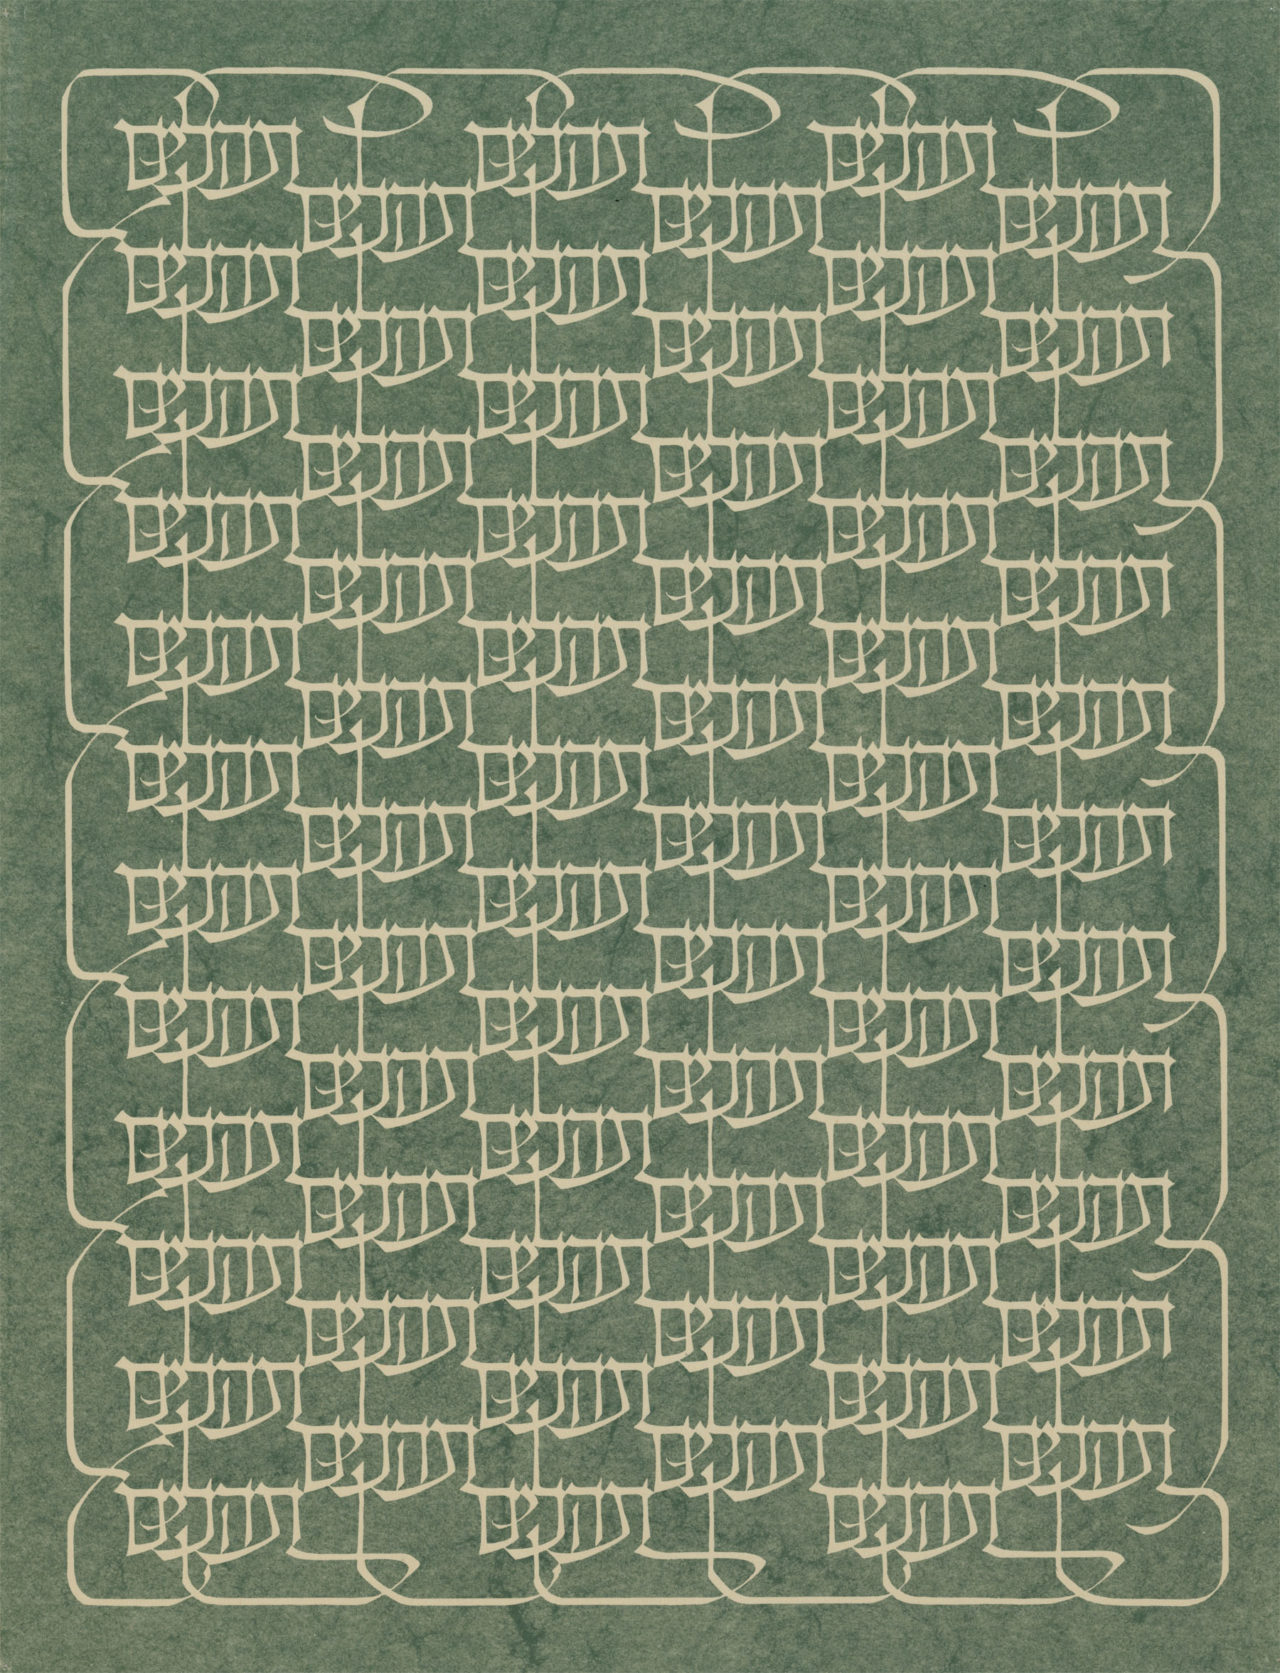 The Psalms endpaper